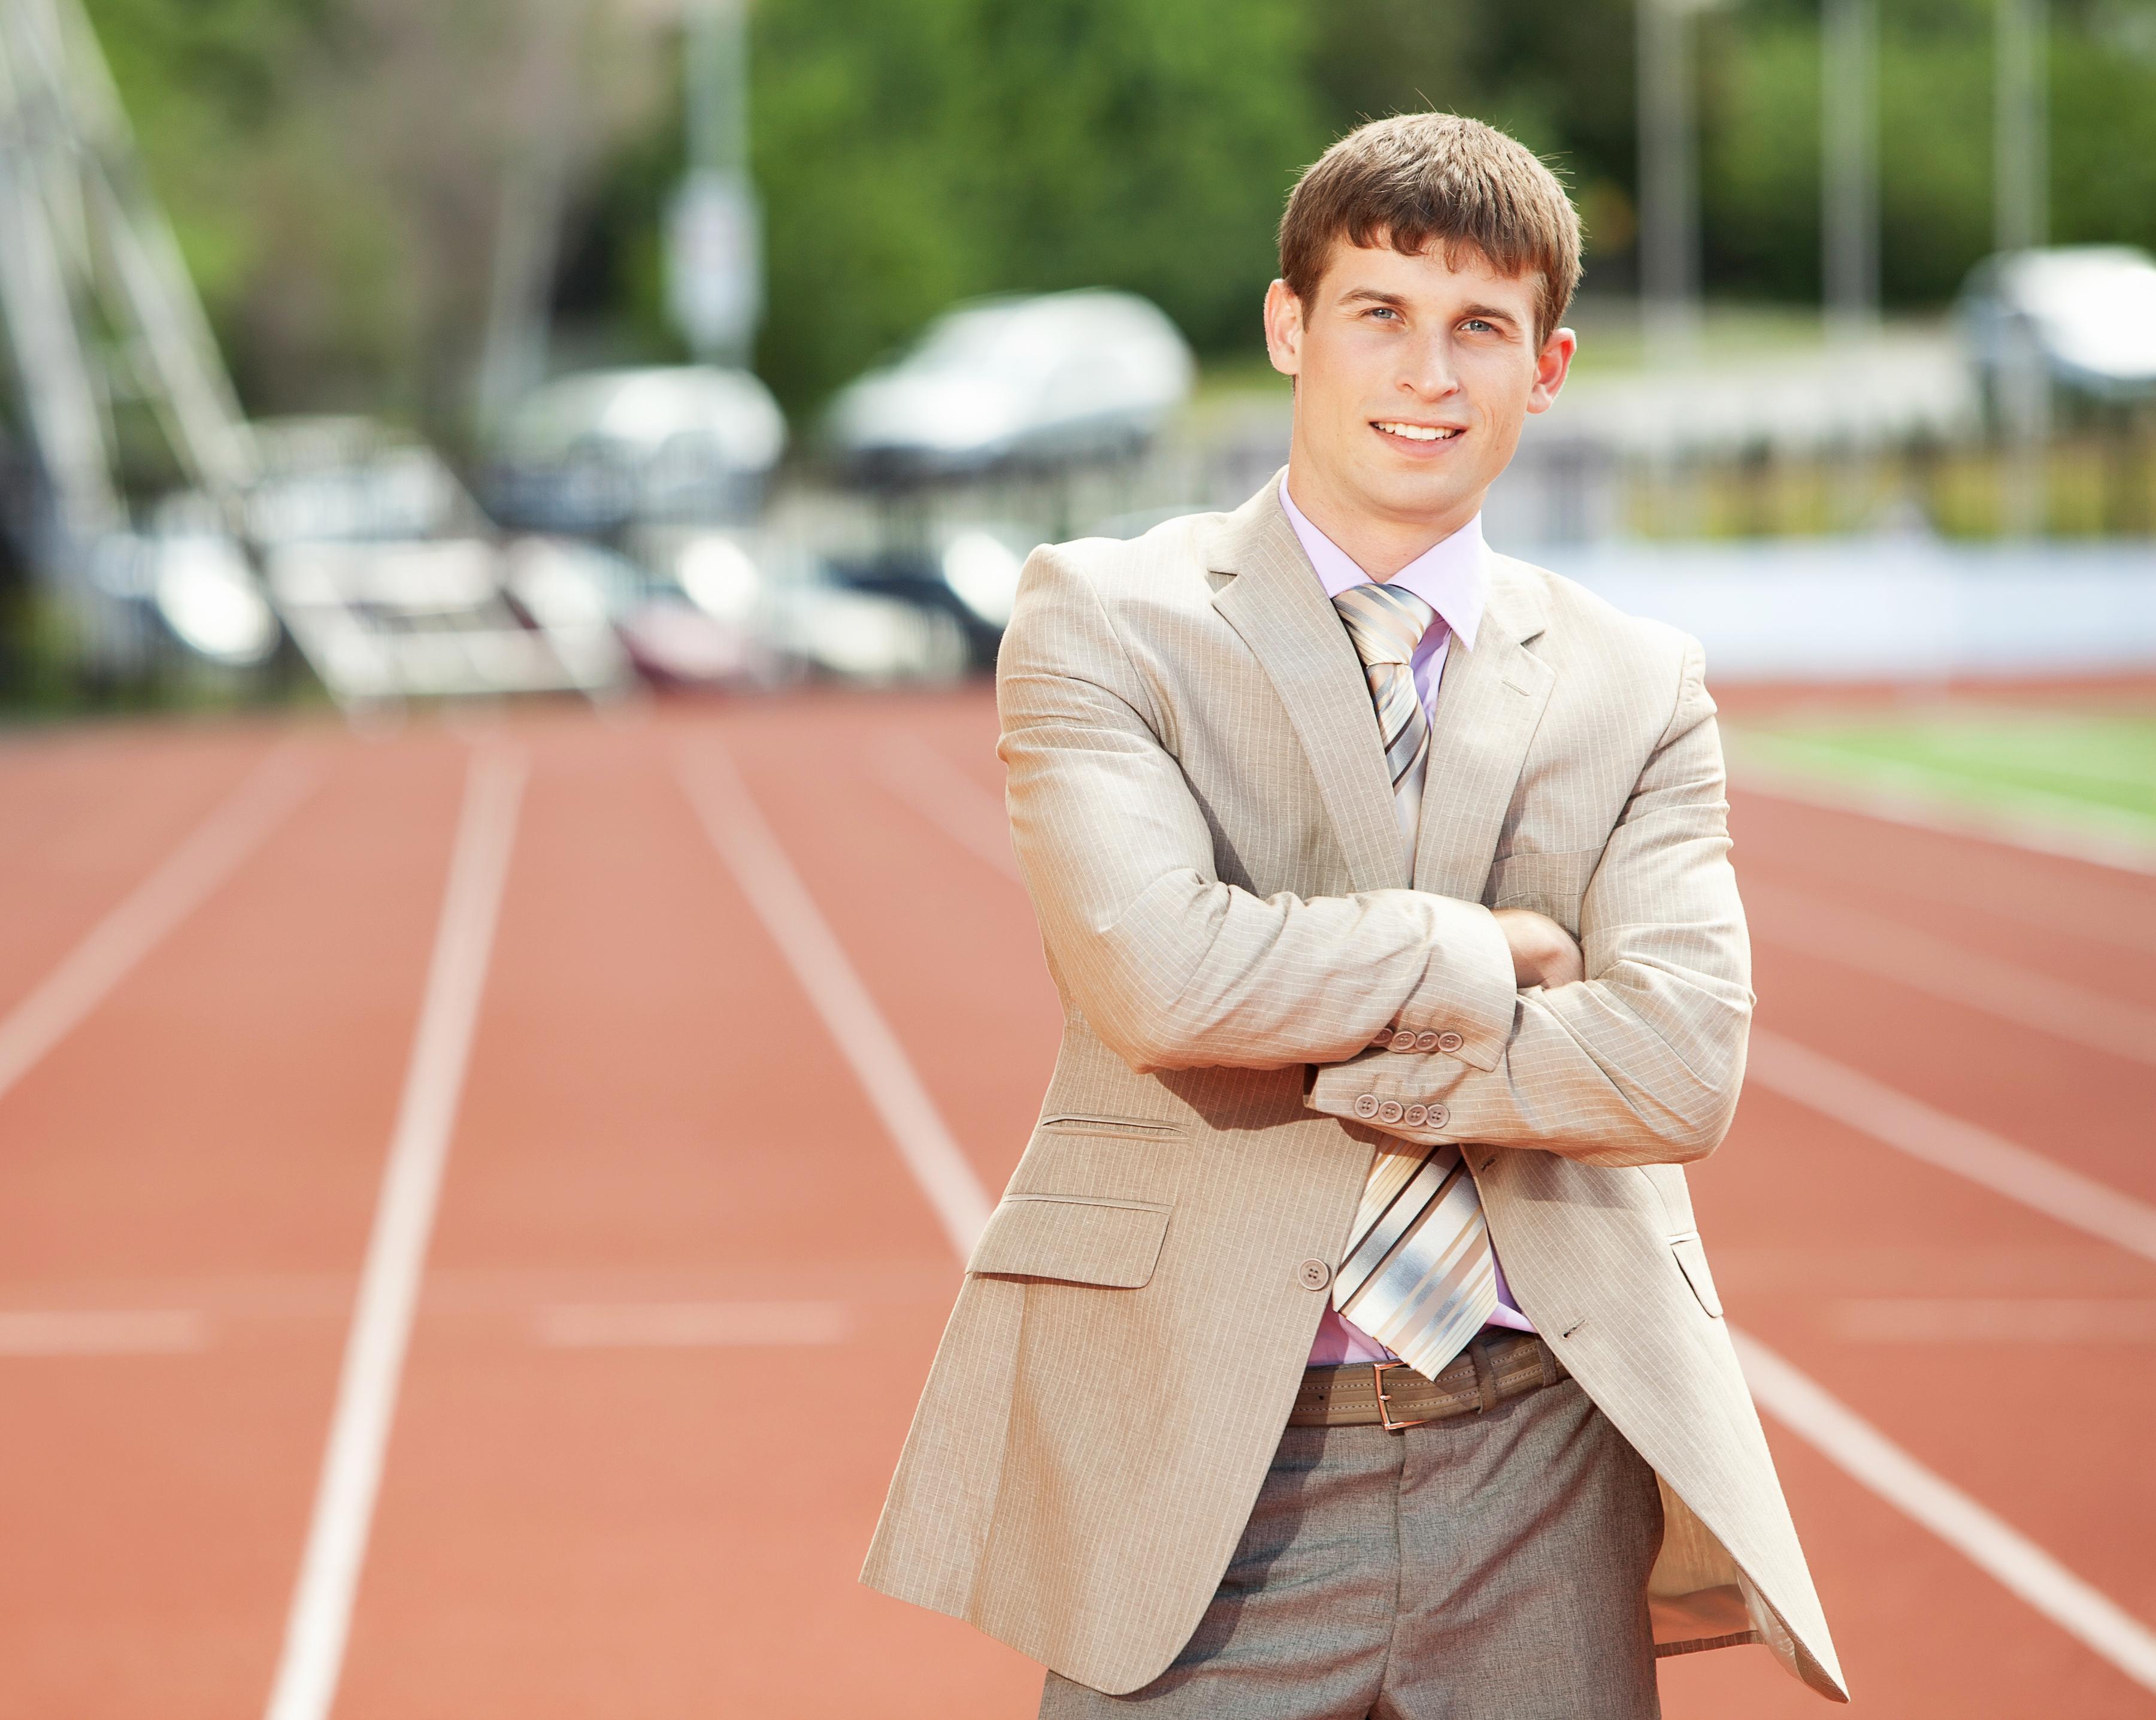 how to become an athletic director